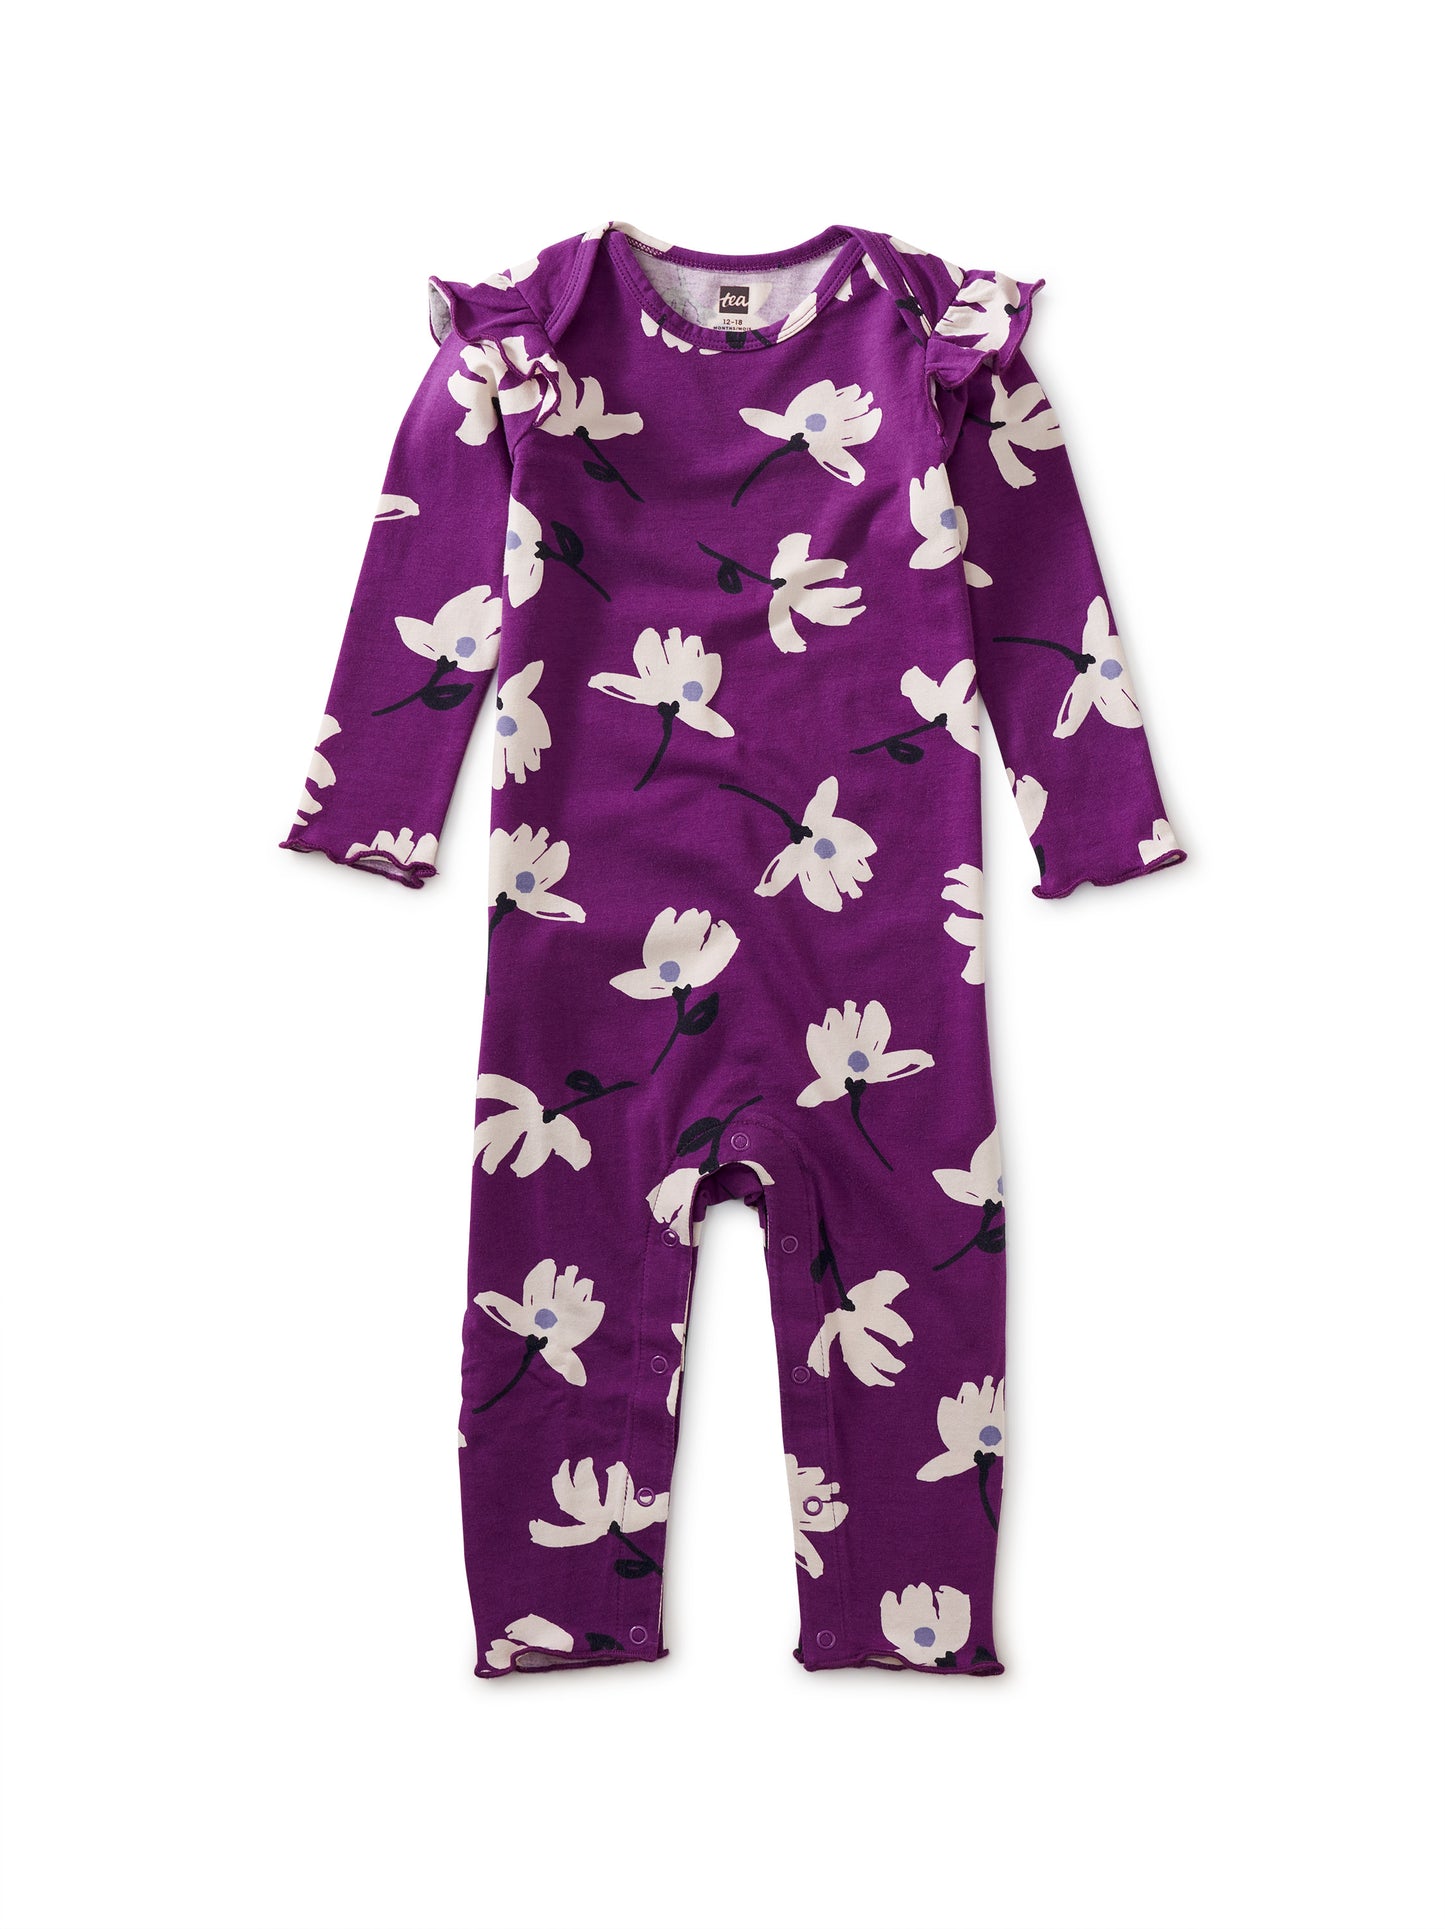 Tea Collection Tossed Lotus Baby Romper